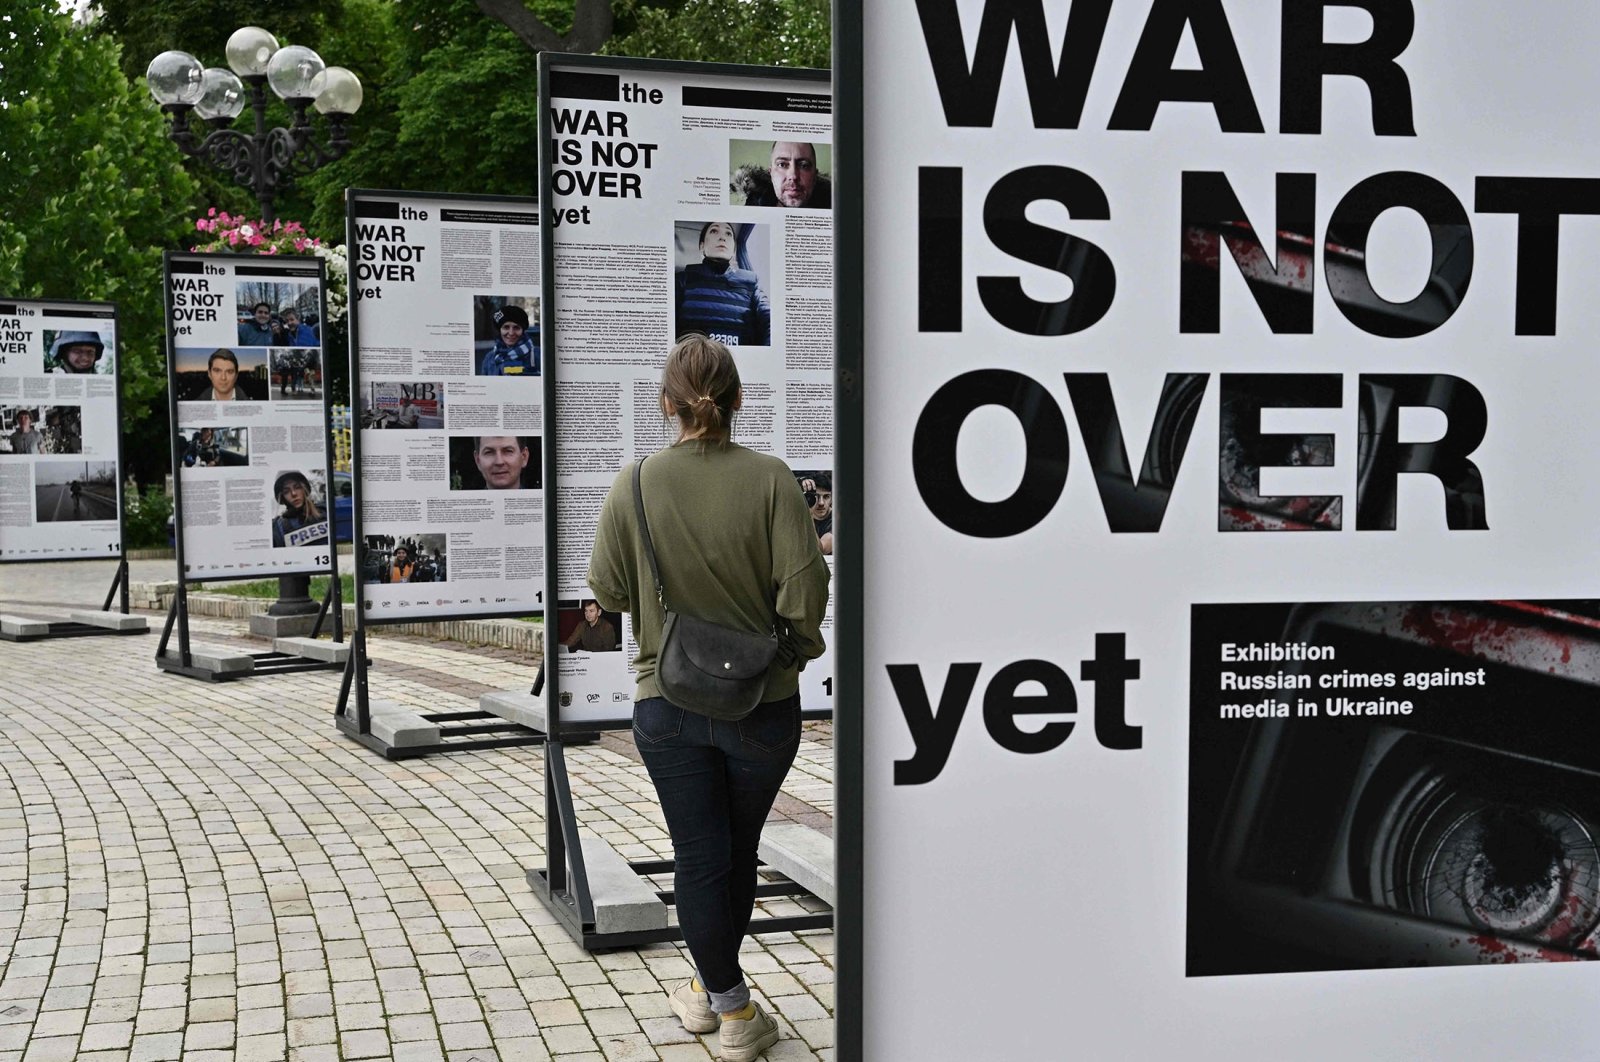 A woman visits the photo exhibition &quot;The War Is Not Over Yet&quot; opened in the Taras Shevchenko park in Kyiv, Ukraine, June 23, 2022. (AFP Photo)